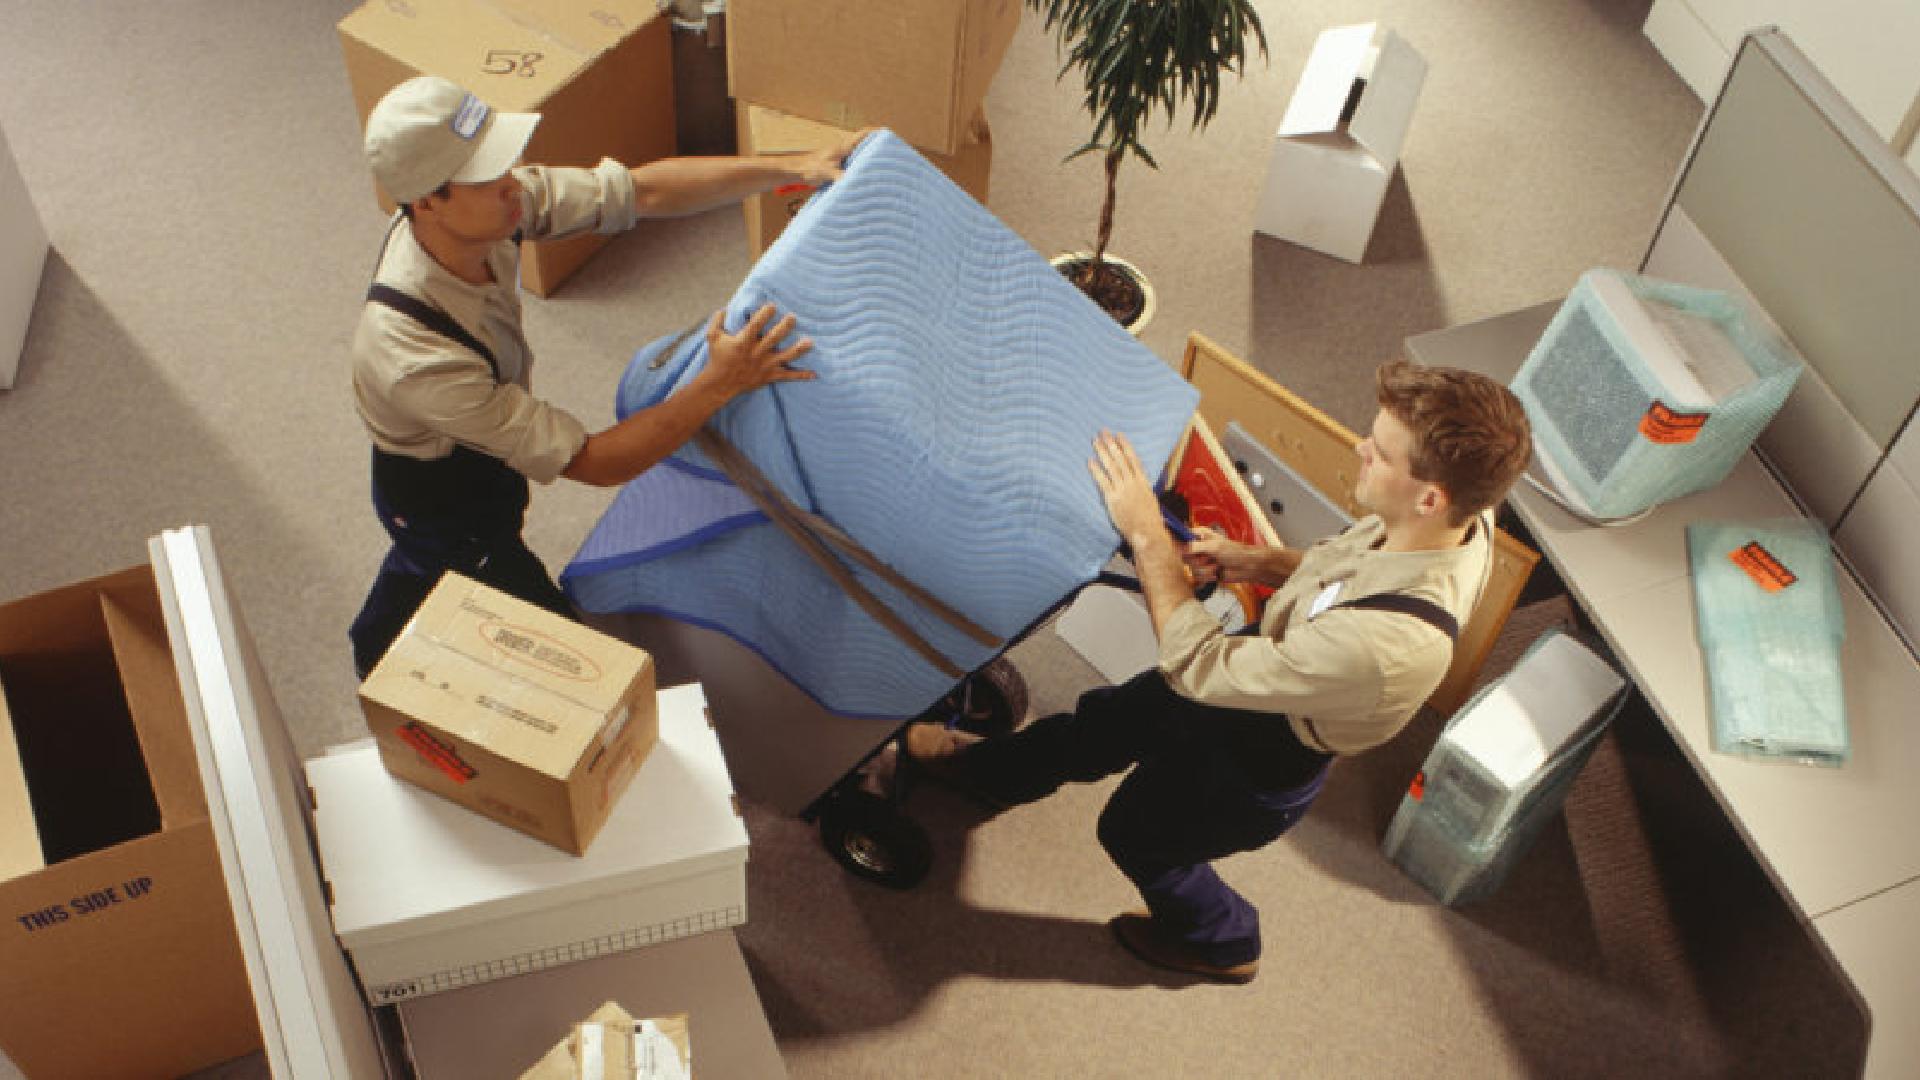 office movers in abu dhabi